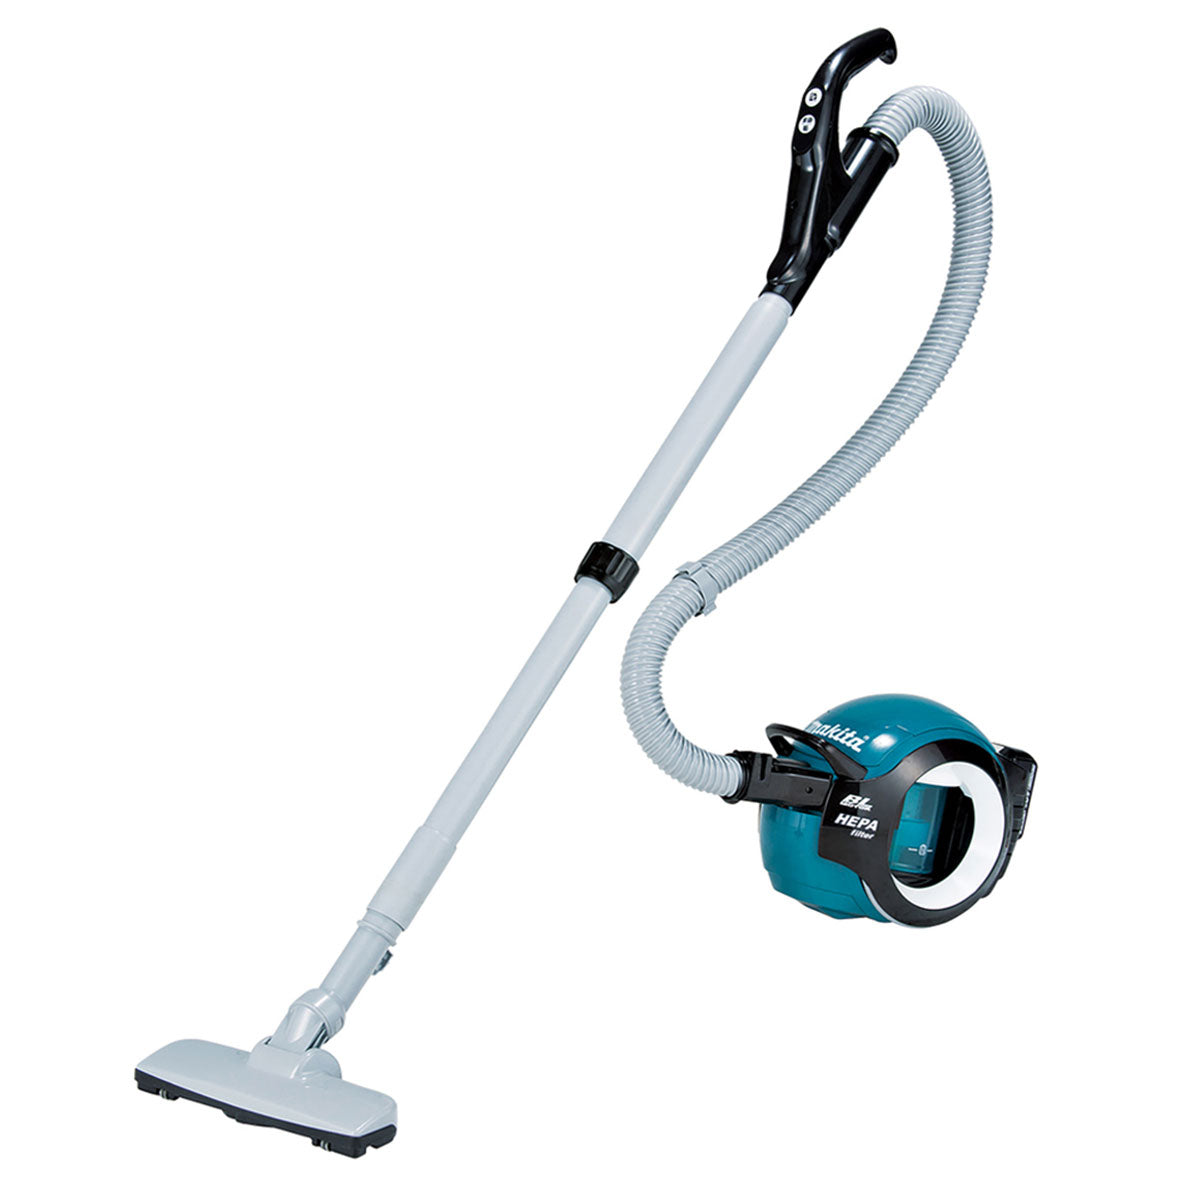 Makita DCL501Z 18V LXT Brushless Cyclone Vacuum Cleaner Body Only - SPL